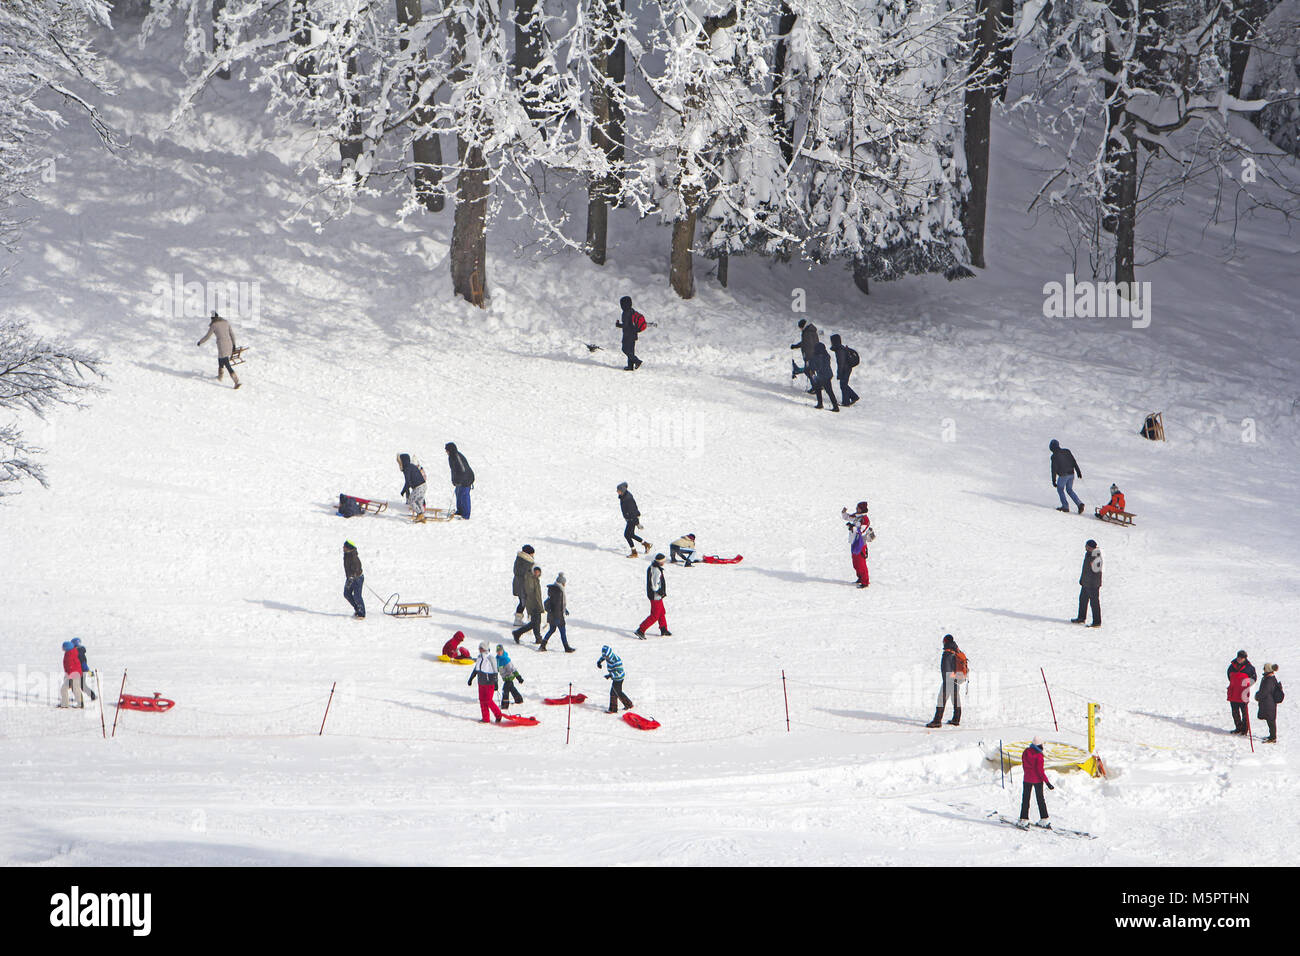 A group kids and people sledding and skiing in the snow in the winter Stock Photo